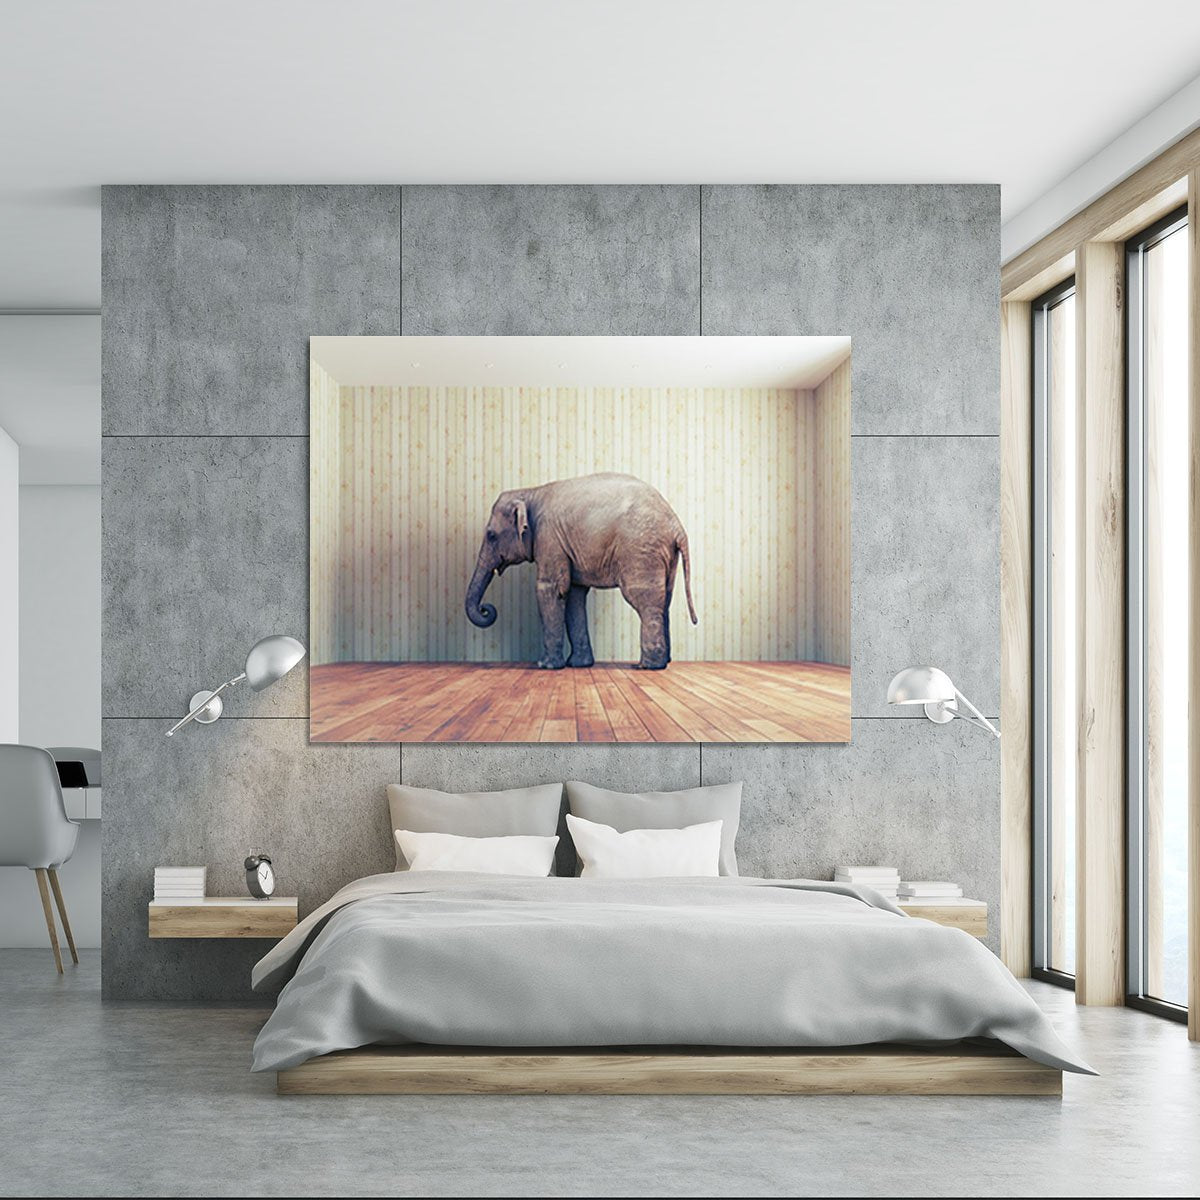 Lone elephant in the room Canvas Print or Poster